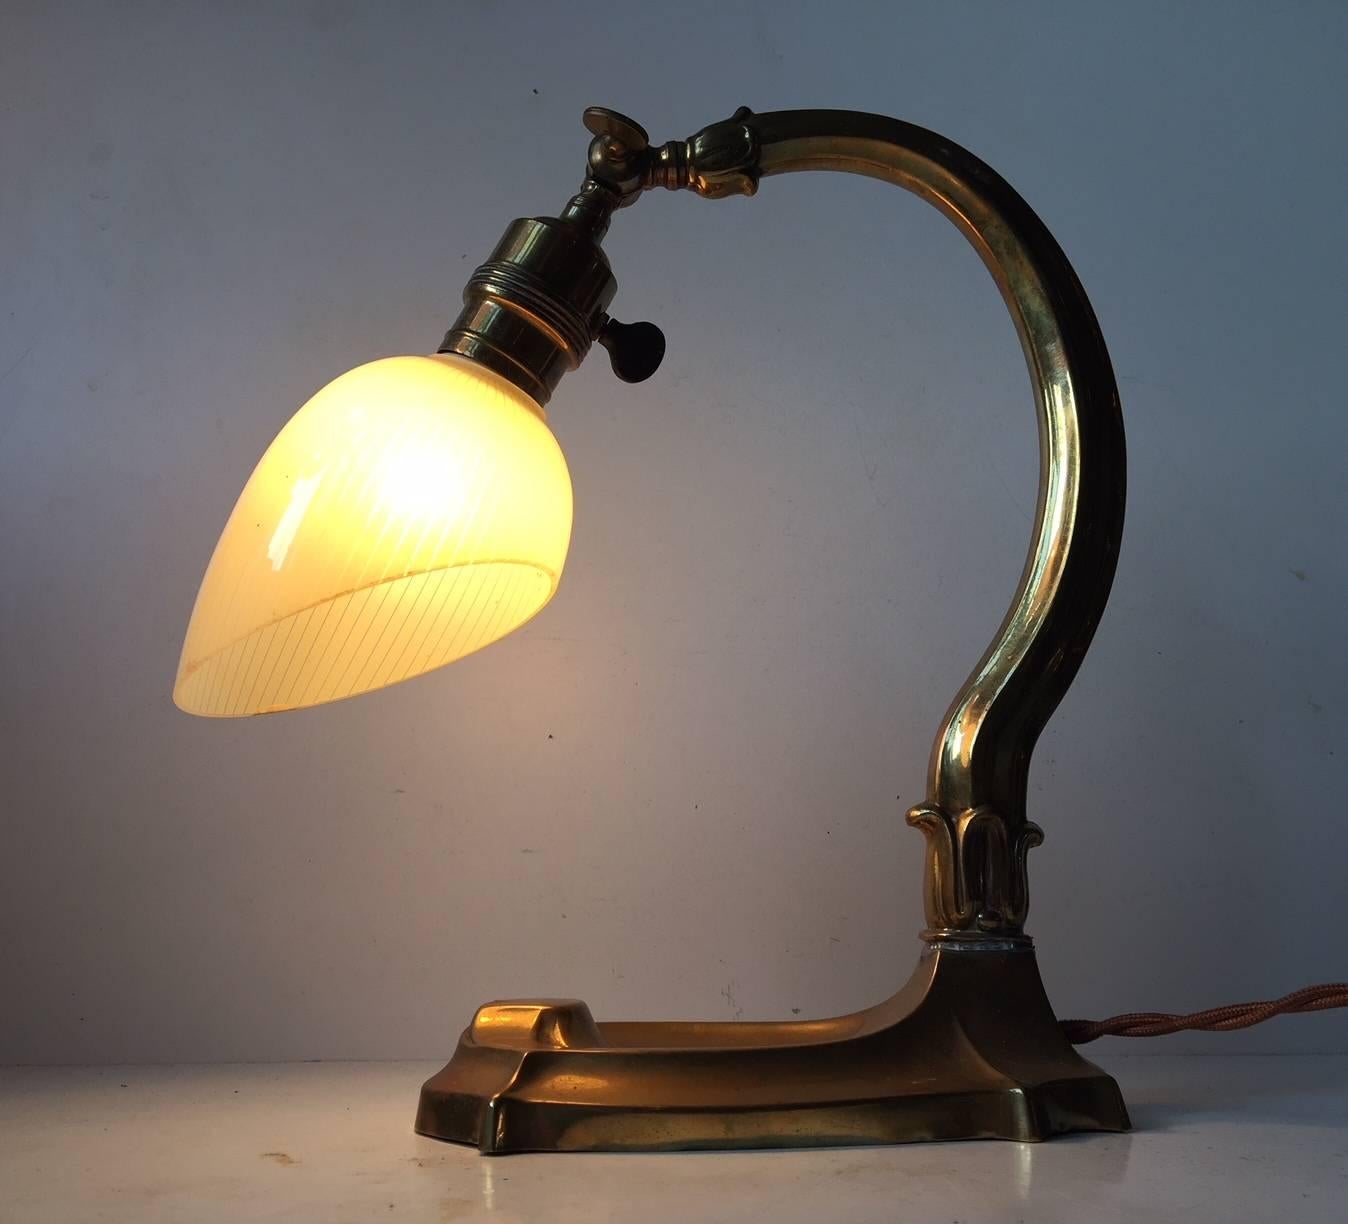 This Danish 1920s desk lamp has a solid brass frame and base. It is mounted with a pin-striped, single-layered glass shade. Adjustable at the shade - 180 degrees.